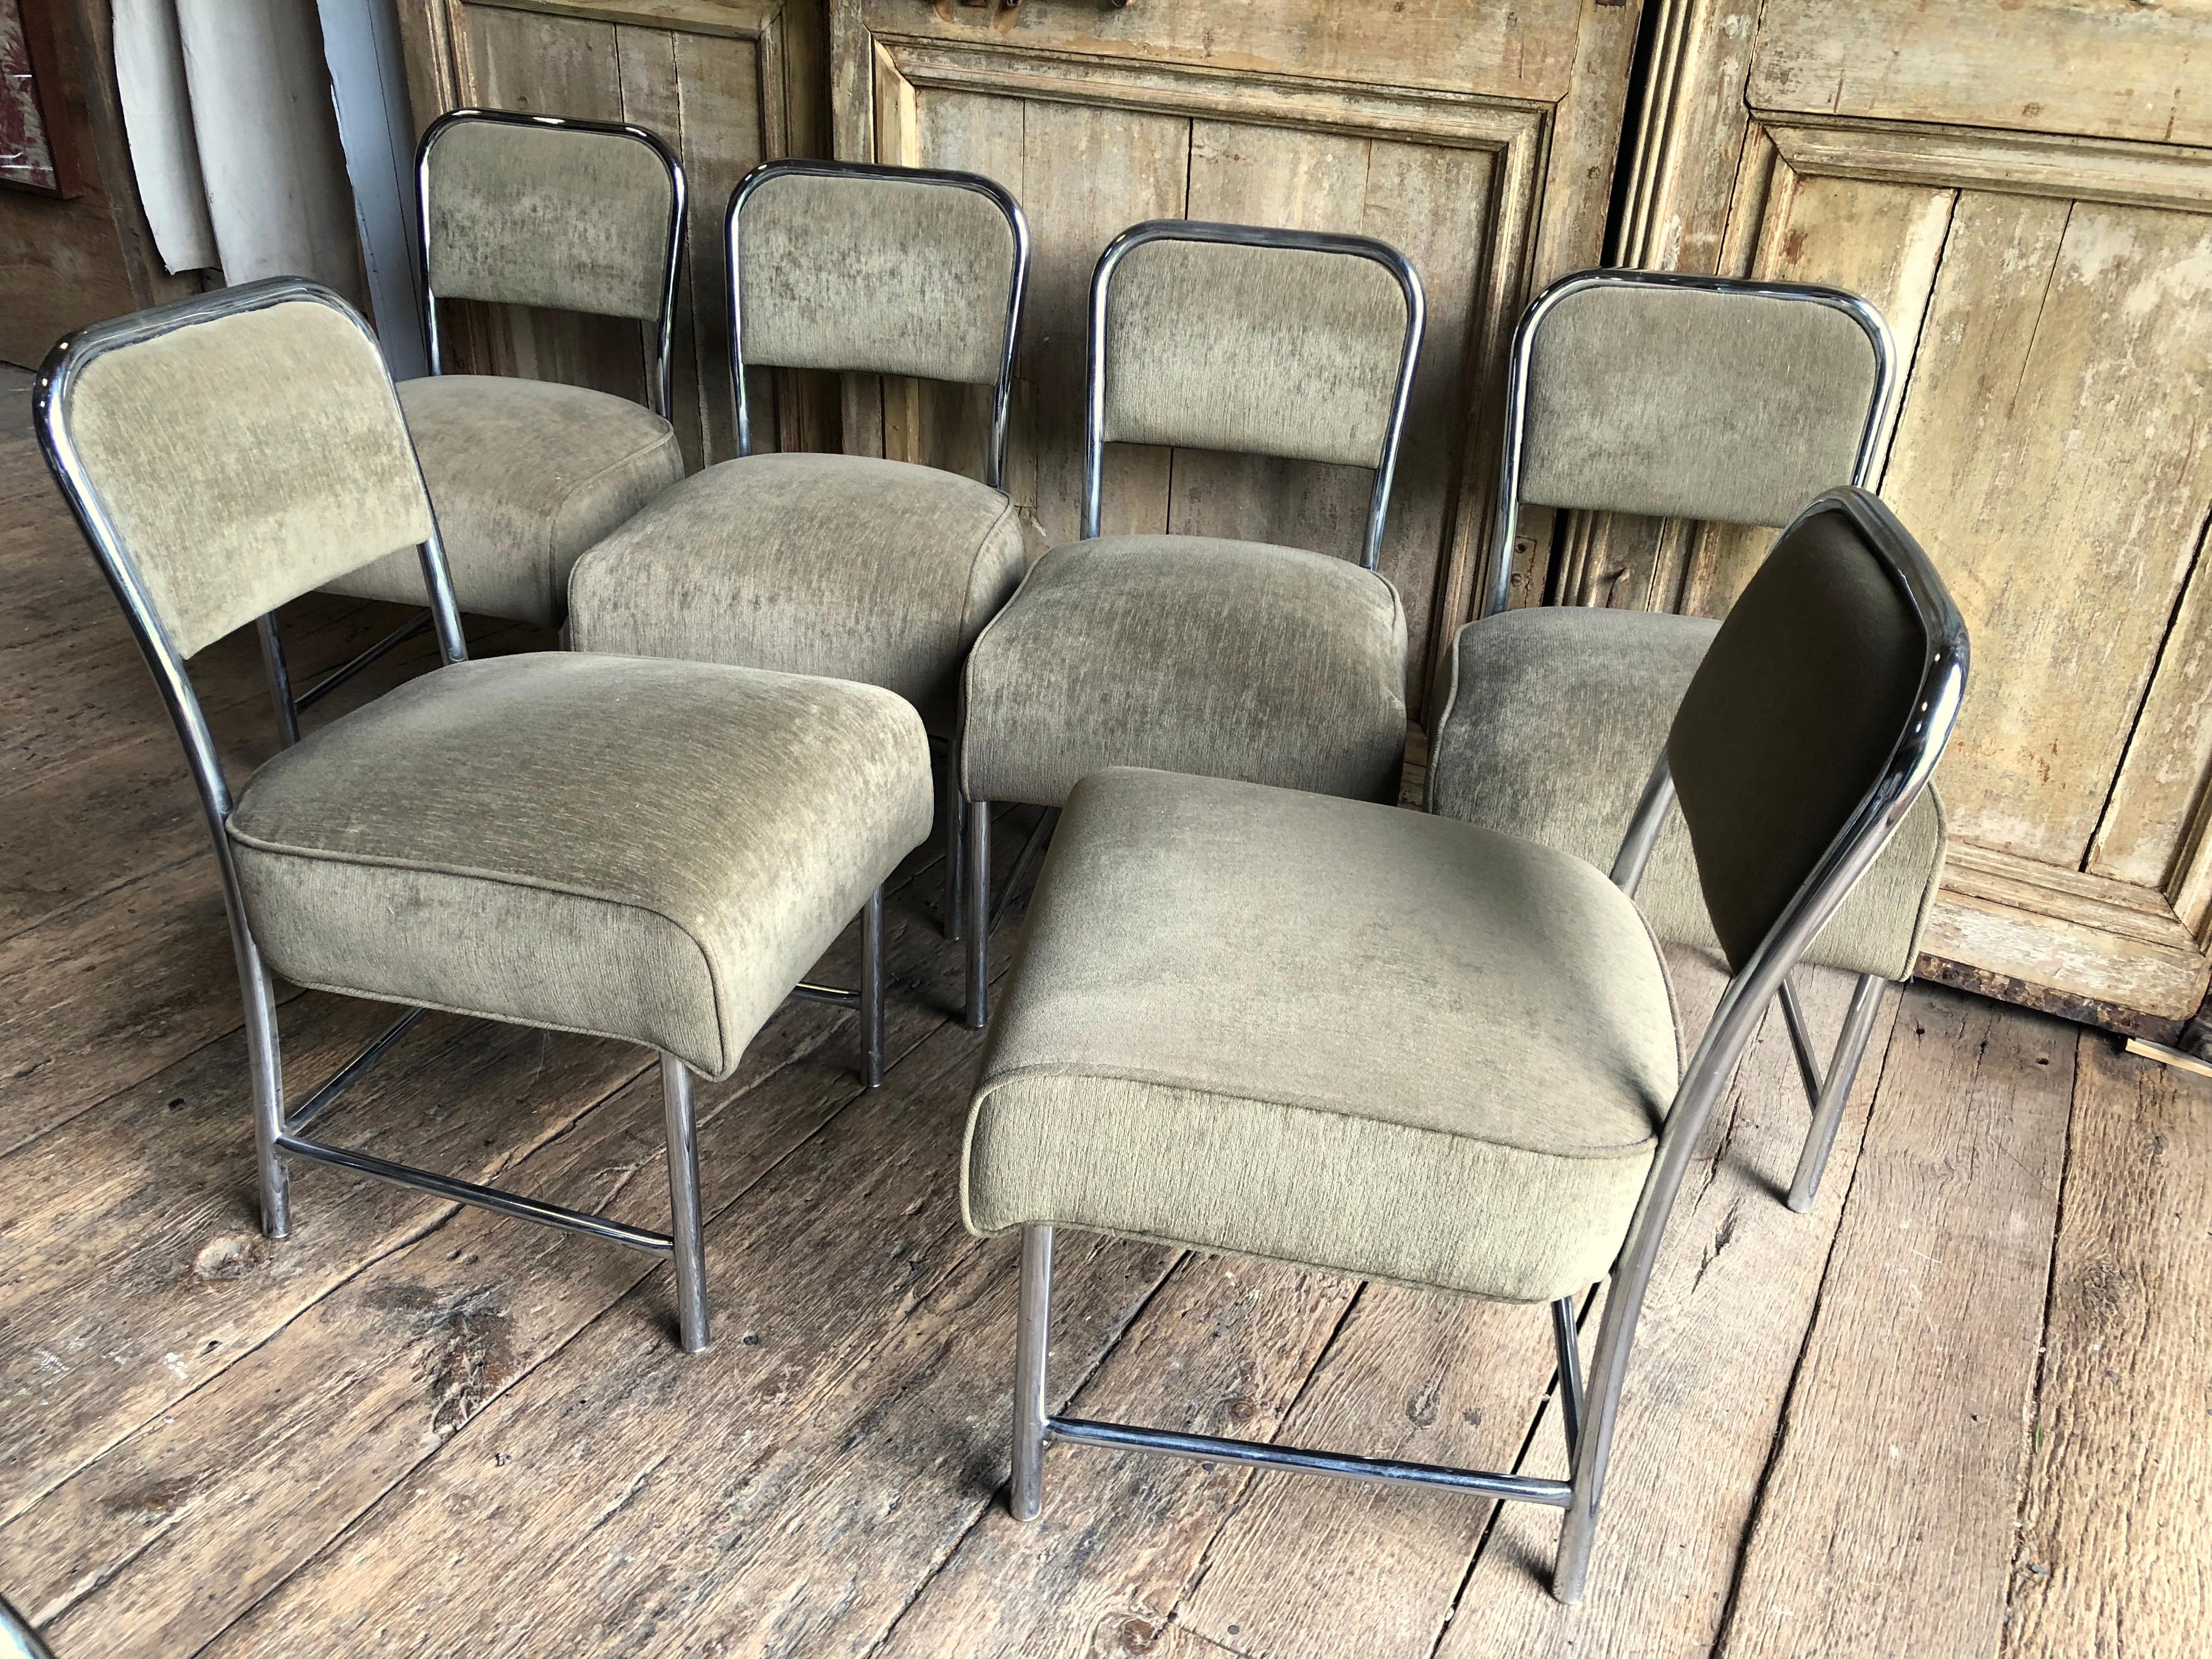 20th Century Set of 8 Art Deco Style Chrome Dining Chairs